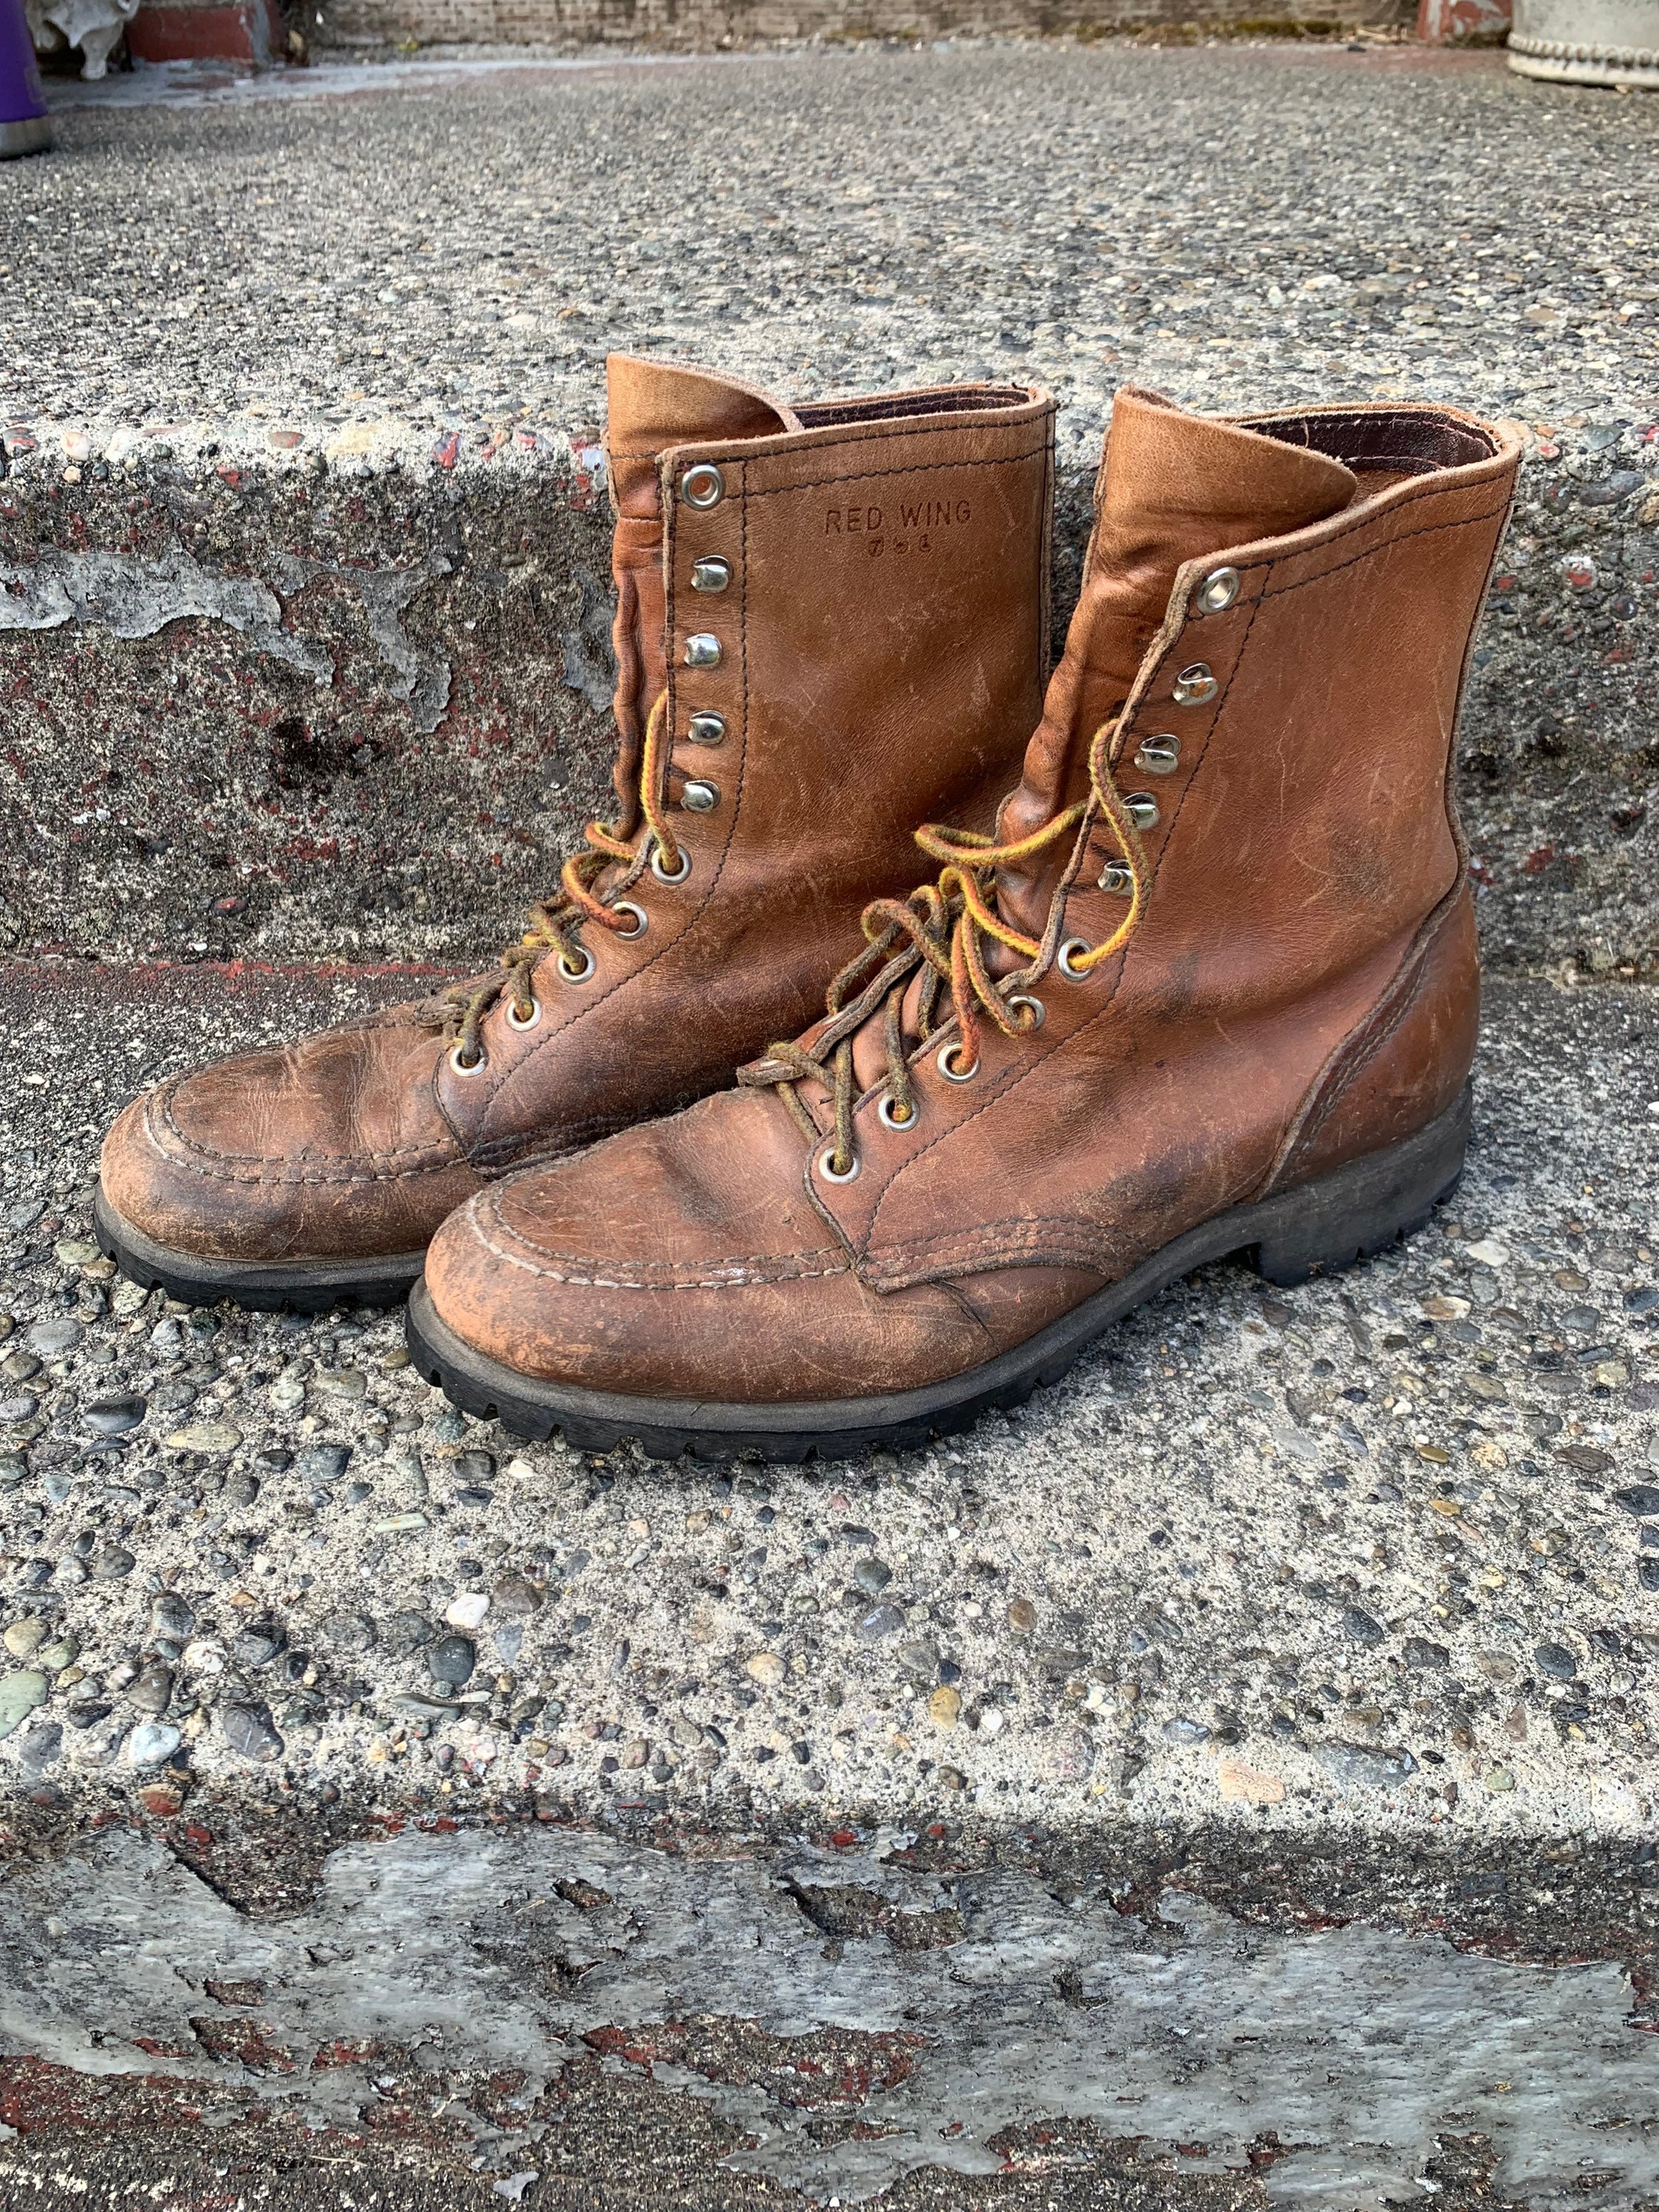 Vintage Red Wing 751 Brown Leather Lace up Work Hiking Boots